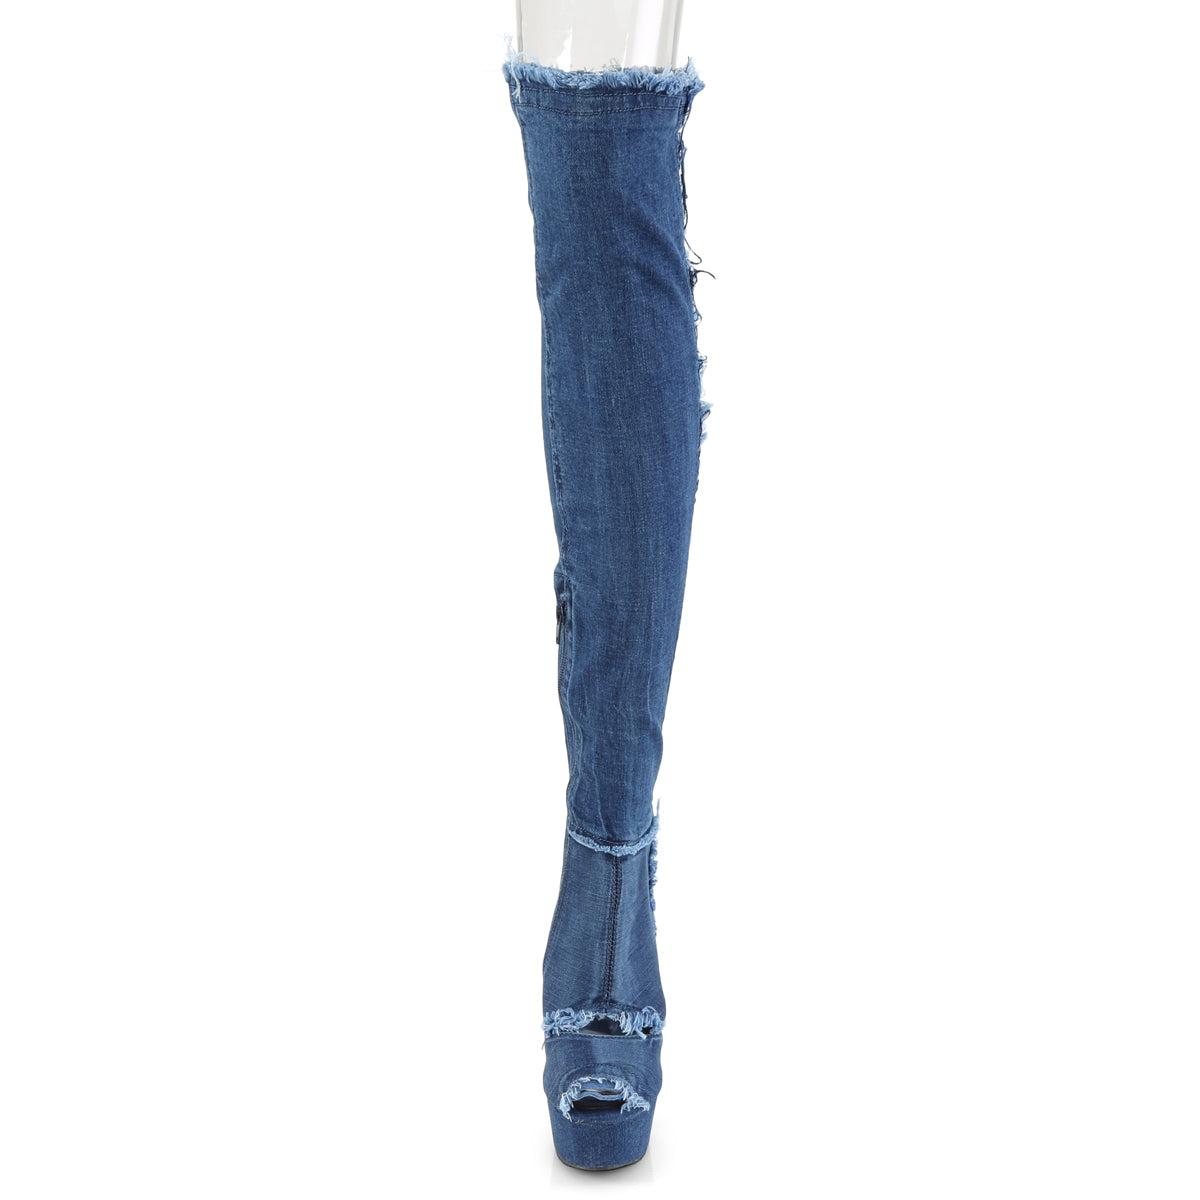 DELIGHT-3030 Blue Thigh High Boots